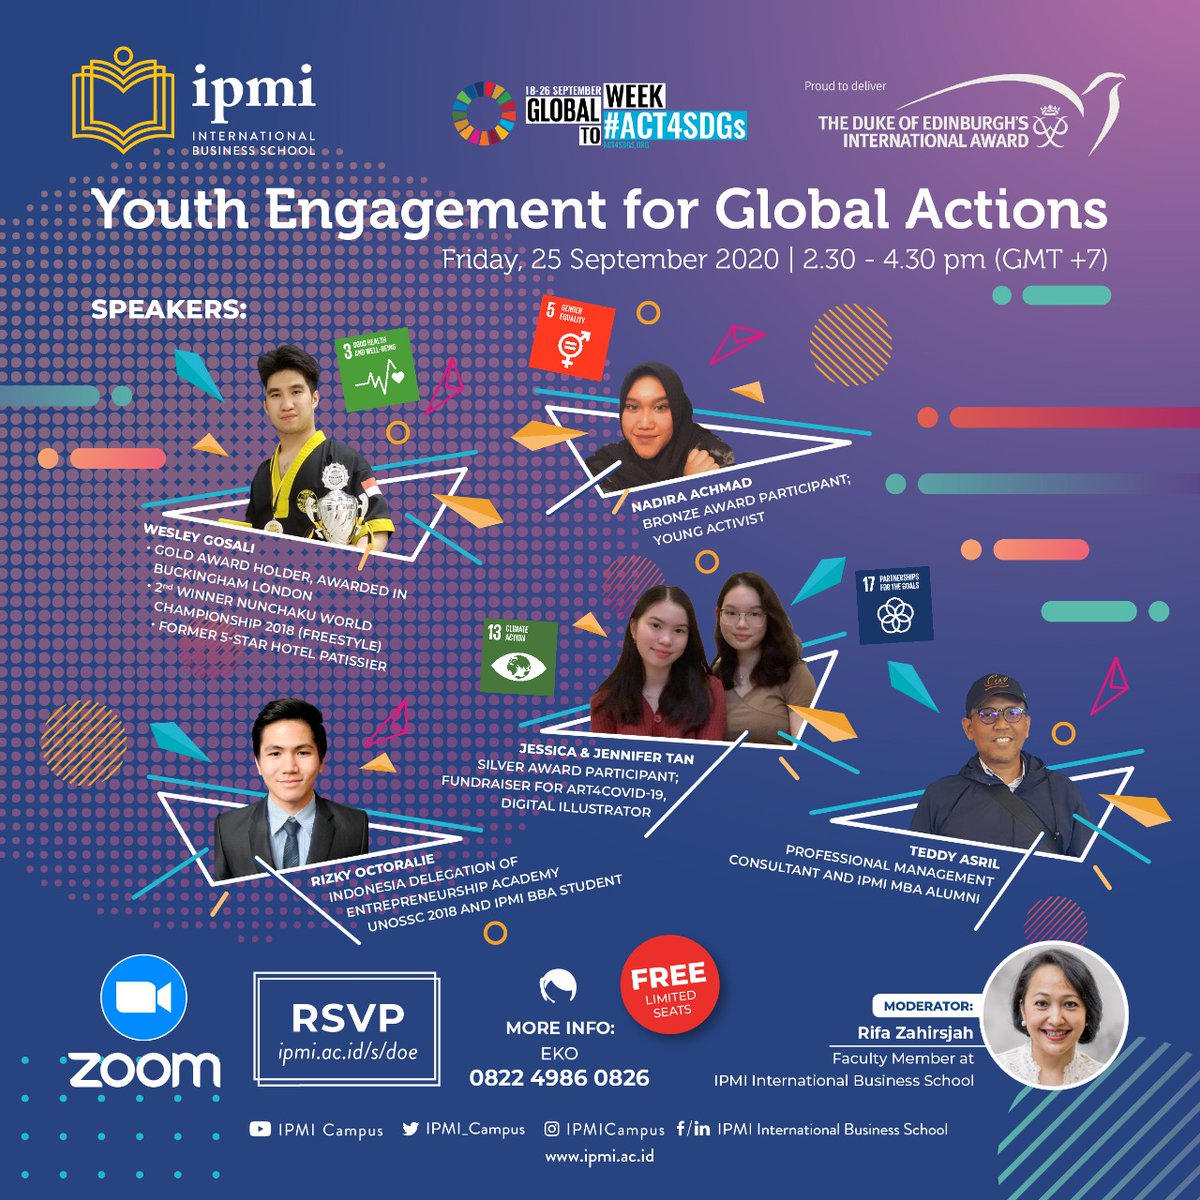 WEBINAR ALERT! Join us and @IPMI_Campus for an engaging talk with inspirational Indonesian youth personalities on how they, and all of us, can positively impact our shared global community. Friday 2.30 p.m. (GMT+7) Register via: ipmi.ac.id/s/doe